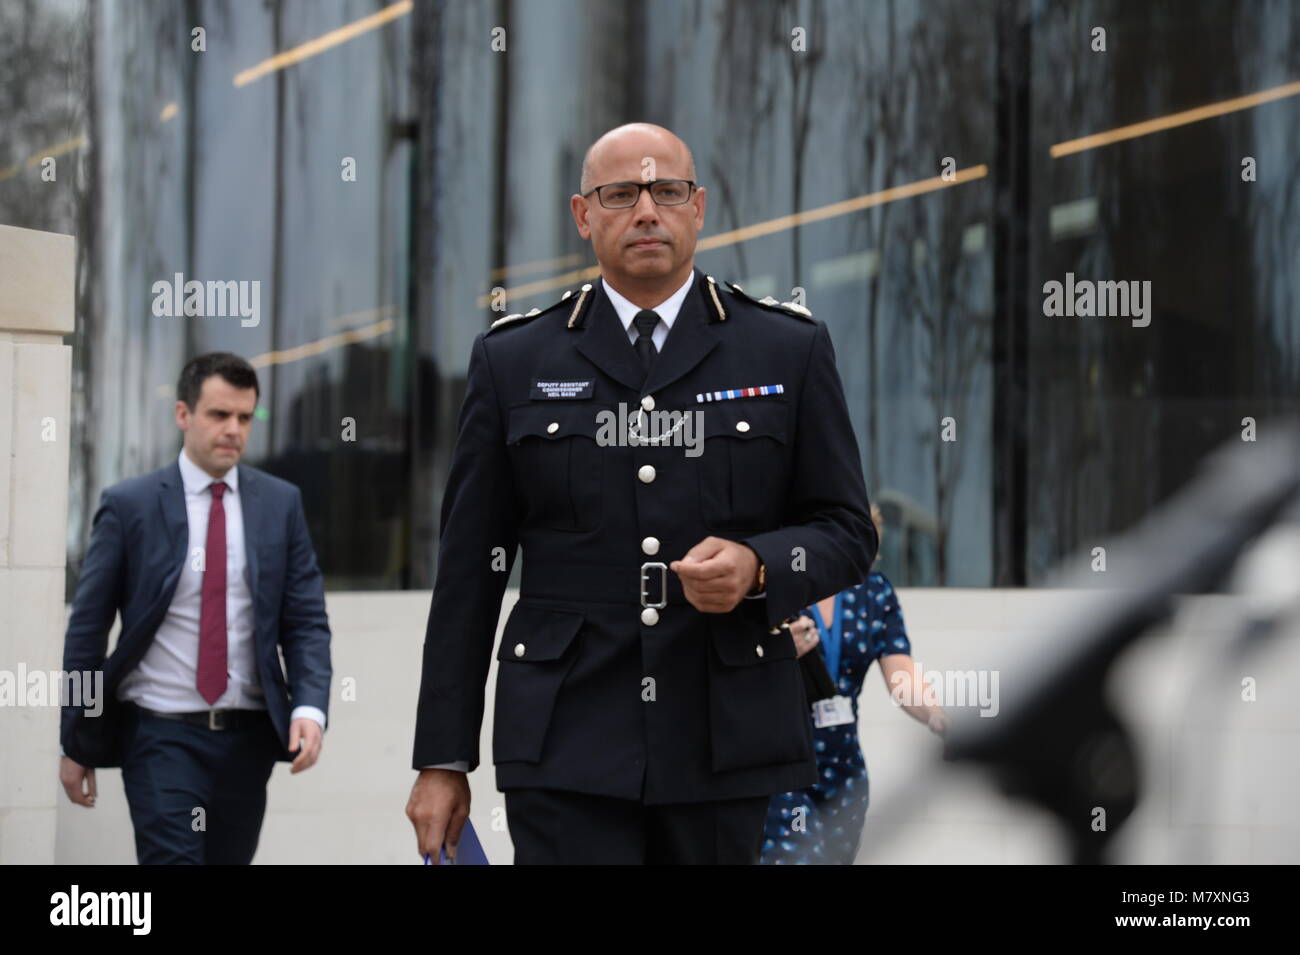 UK's head of counter-terrorism policing Neil Basu, arrives to address the media at Scotland Yard, where he explained that the investigators' 'prime focus' is how poison was administered to former Russian double agent Sergei Skripal and his daughter Yulia, as police and members of the armed forces continue to investigate the suspected nerve agent attack in Salisbury. Stock Photo